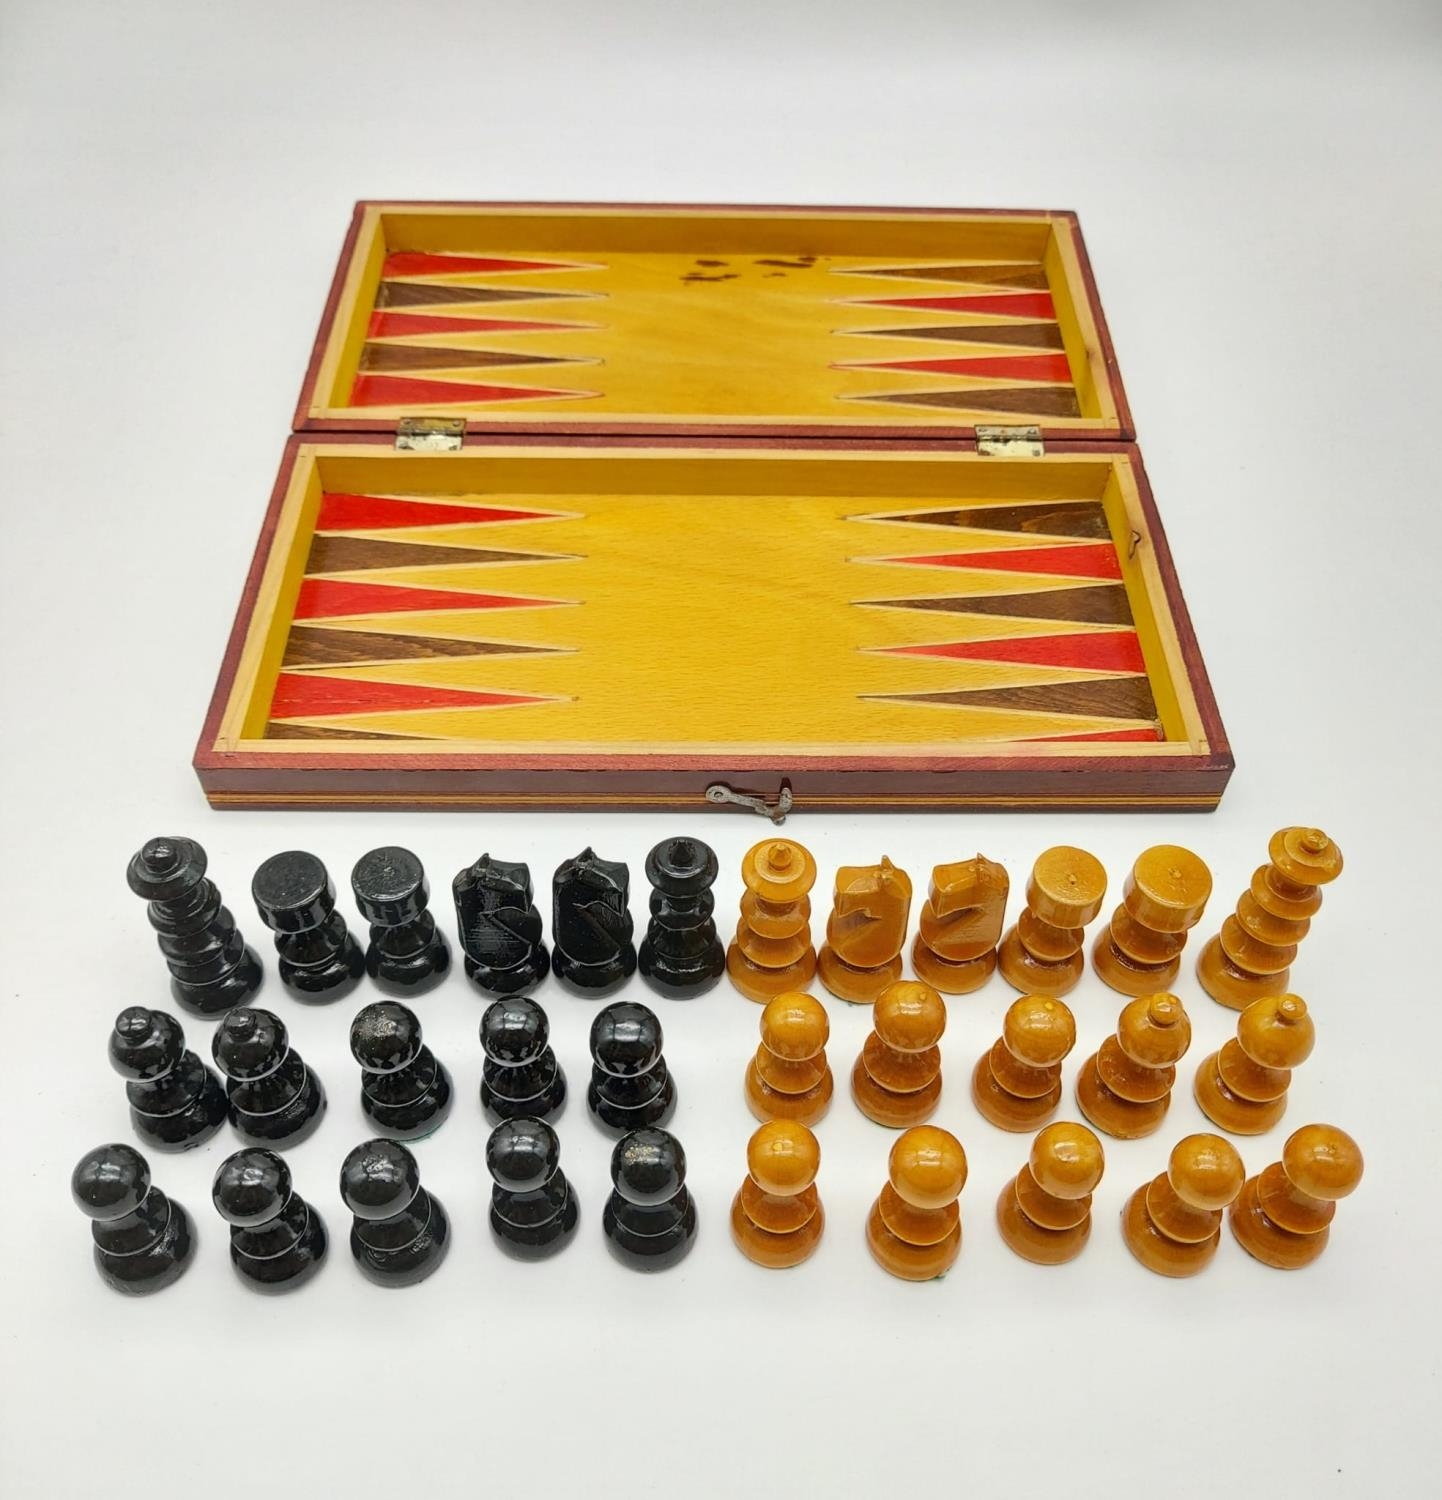 A Vintage Wooden Chess Set with Folding Board. Backgammon board on interior. 26 x 26cm. - Image 2 of 6